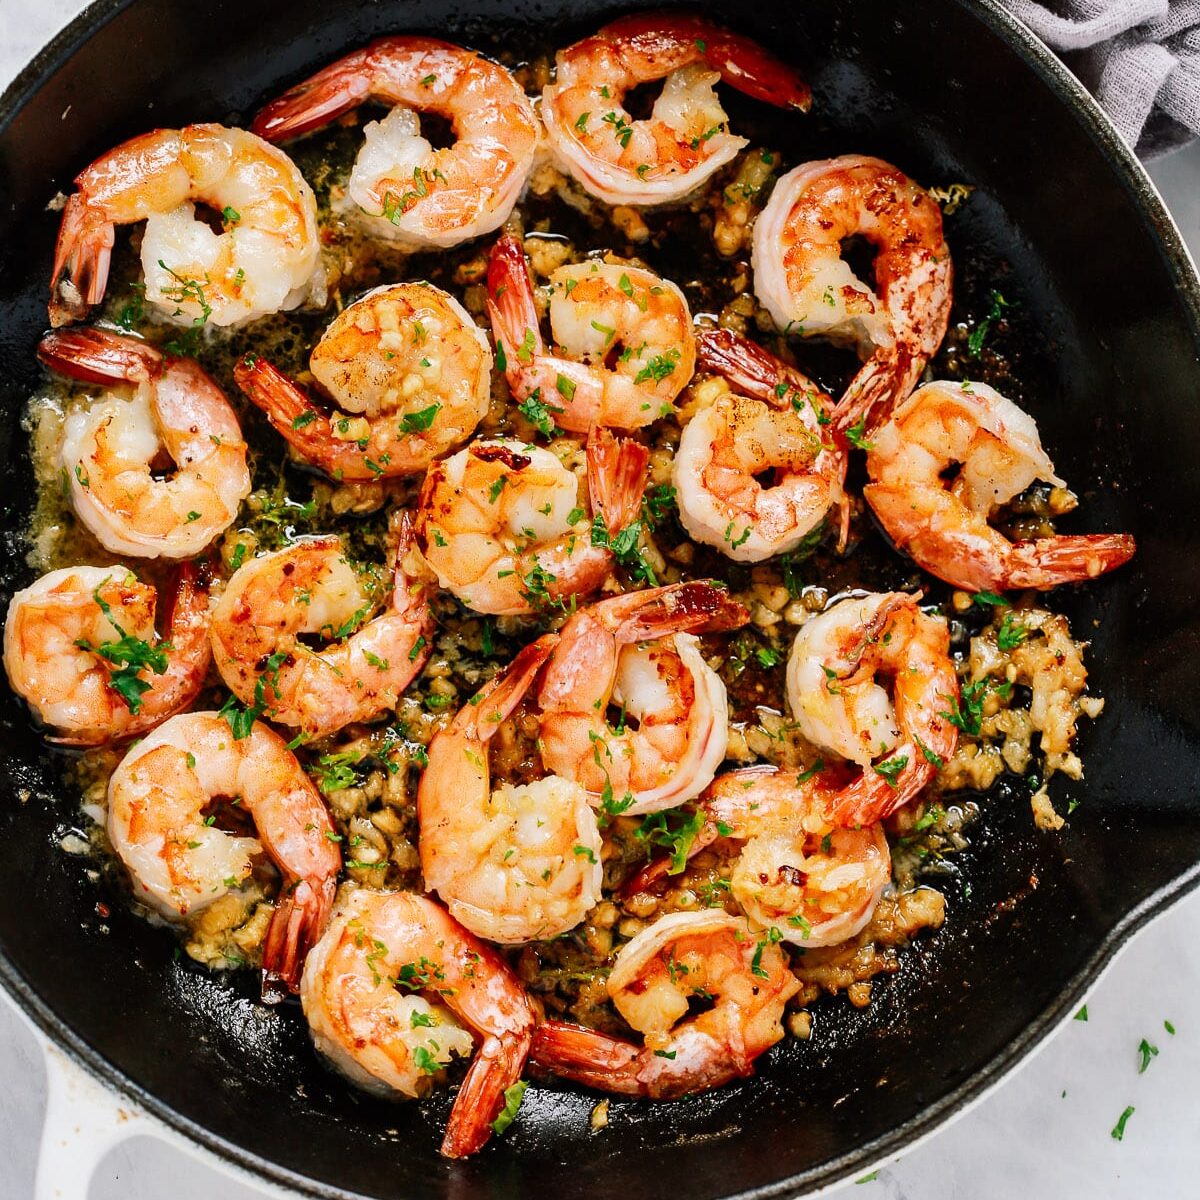 Overhead view of a skillet containing garlic butter shrimp. One of my favorite date night dinner ideas.